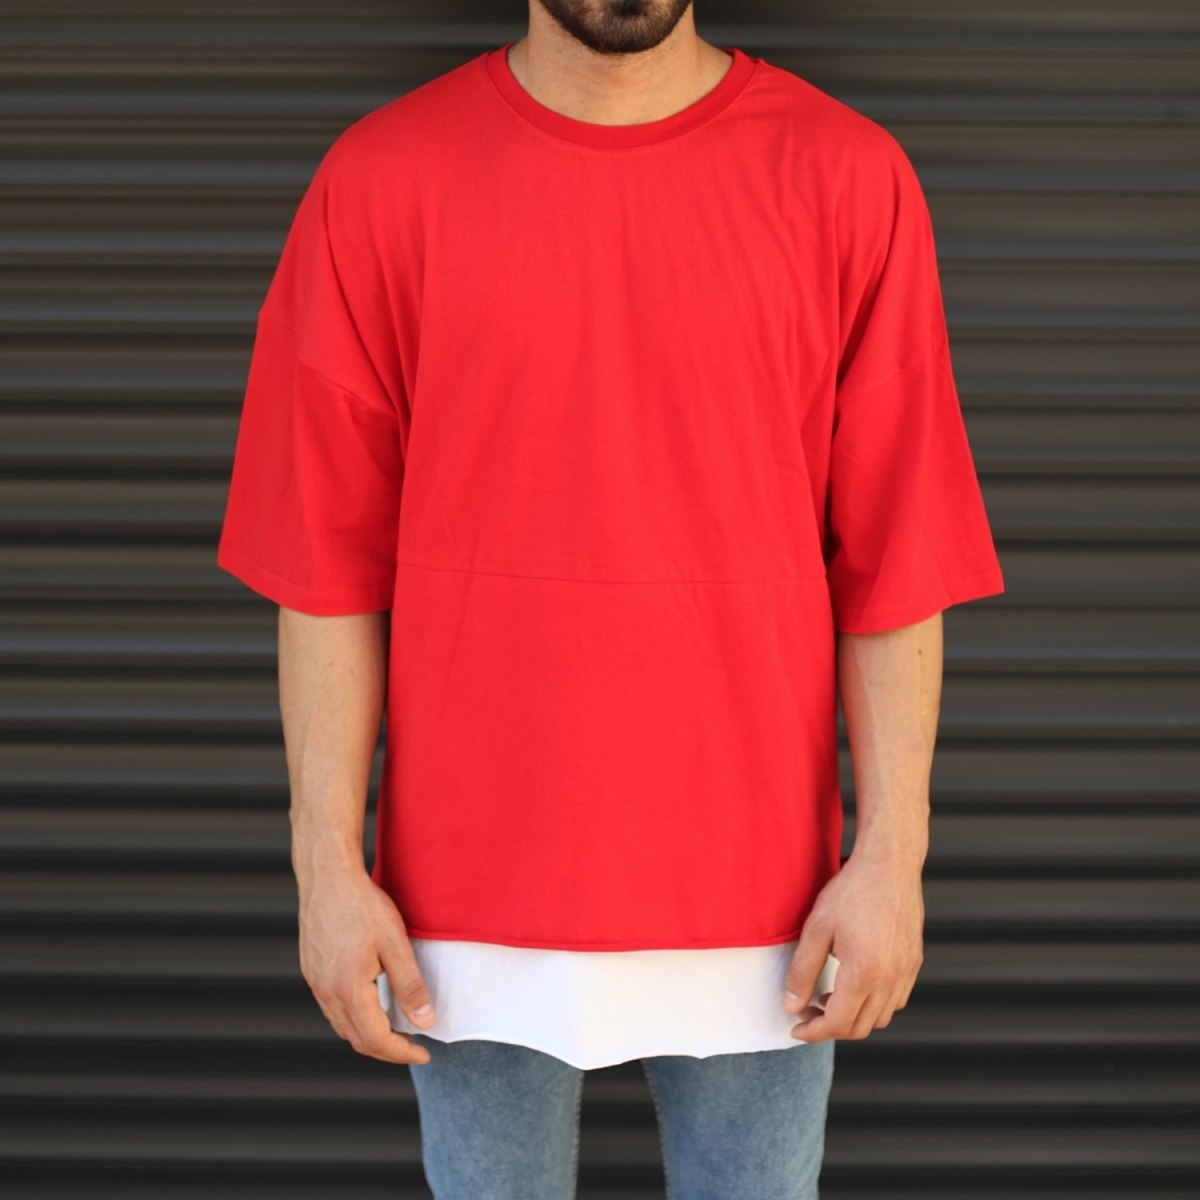 Men's Oversized Round Neck T-Shirt With Zipper Detail Red - 1